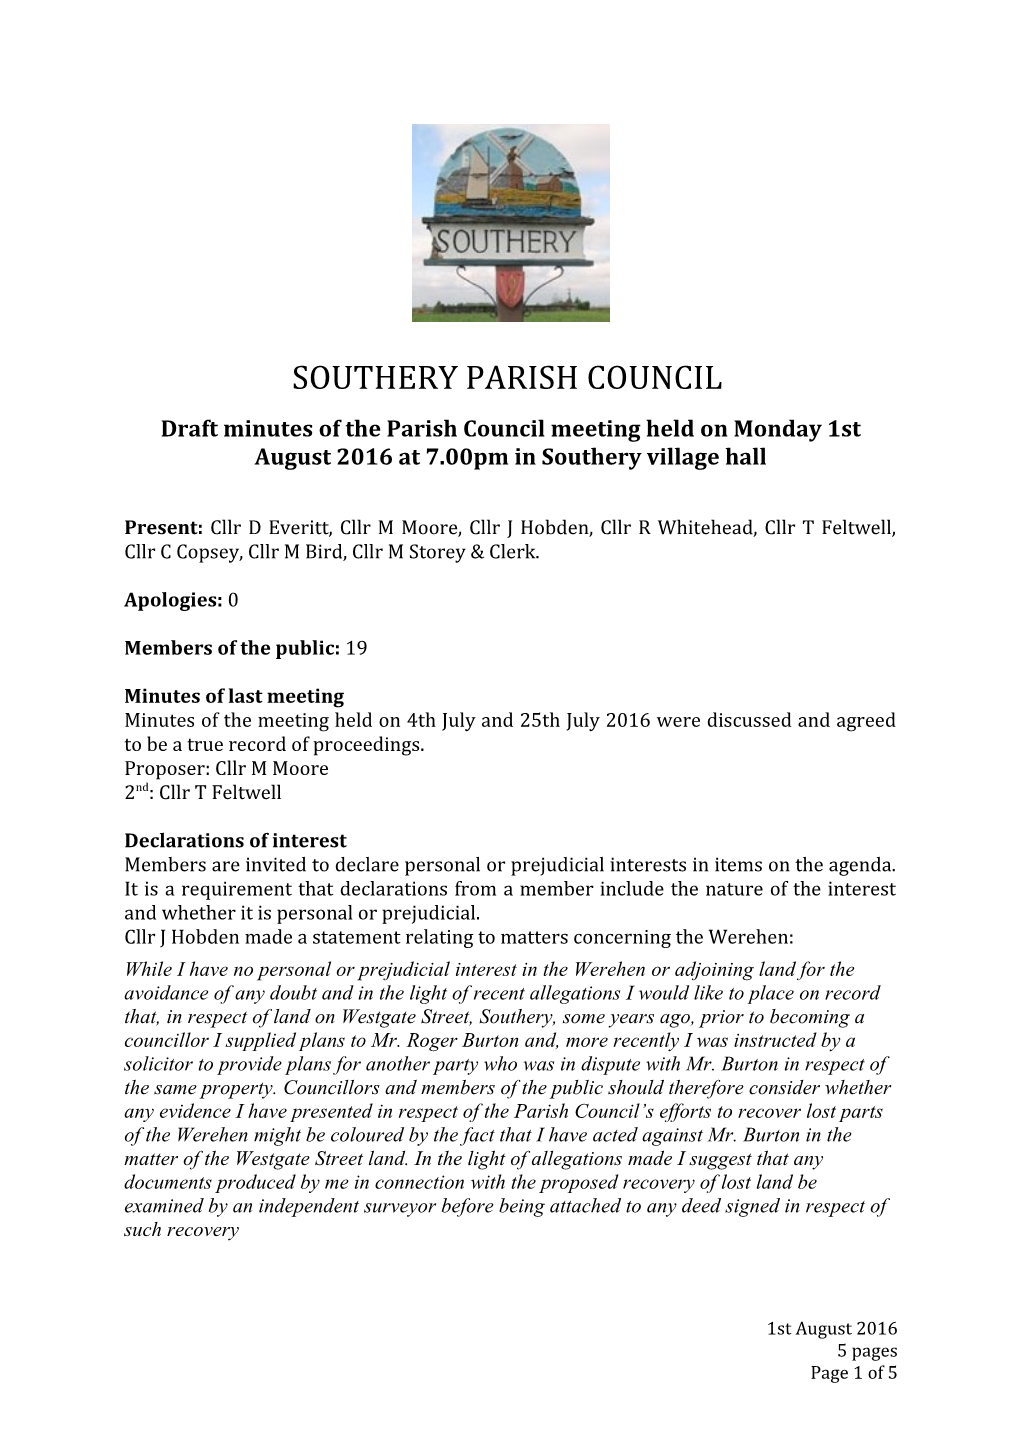 Draft Minutes of Theparish Council Meetingheld on Monday 1St August 2016 At7.00Pm in Southery